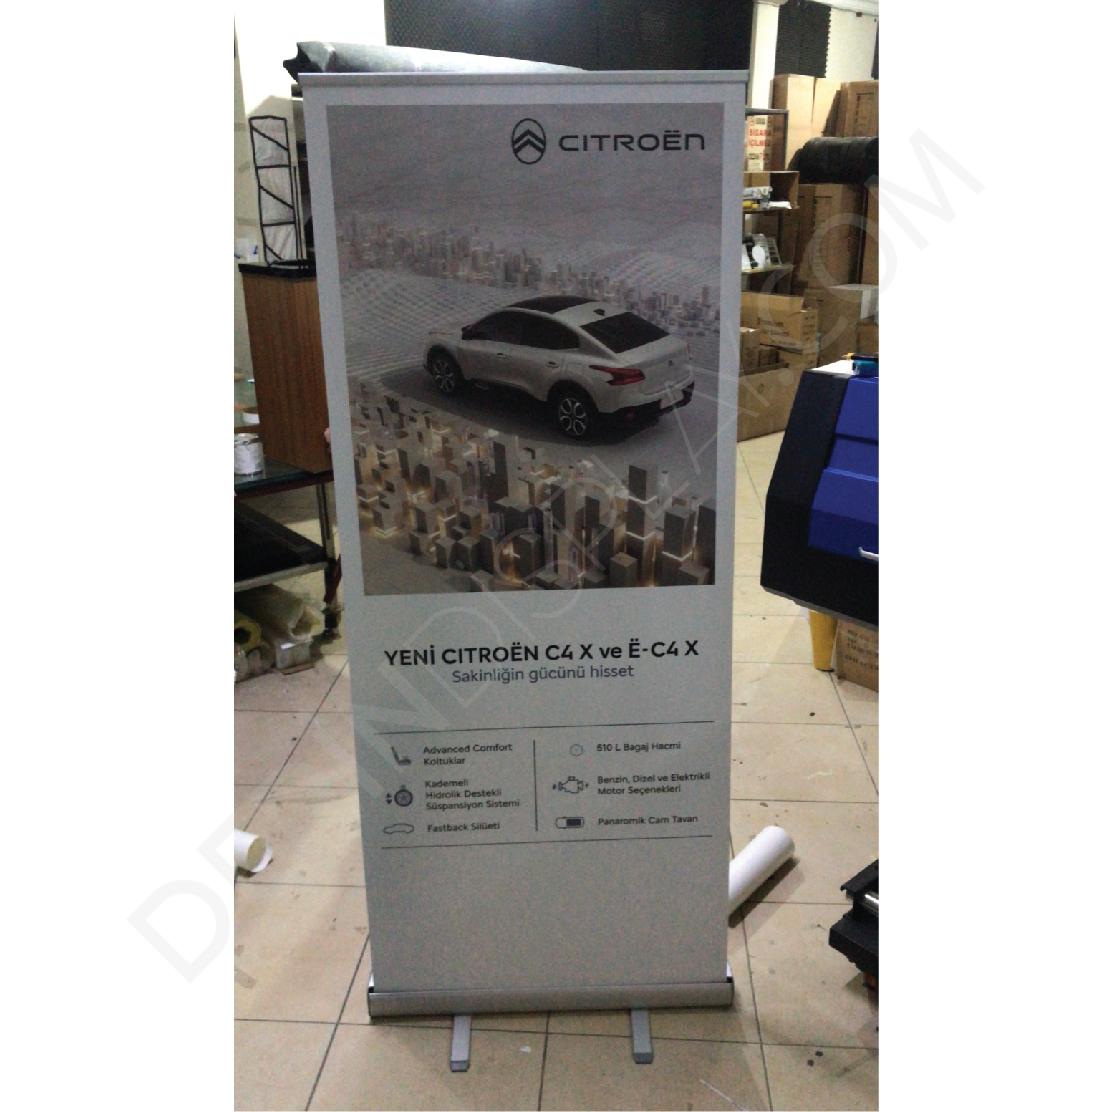 rollup_banner_80x200_1